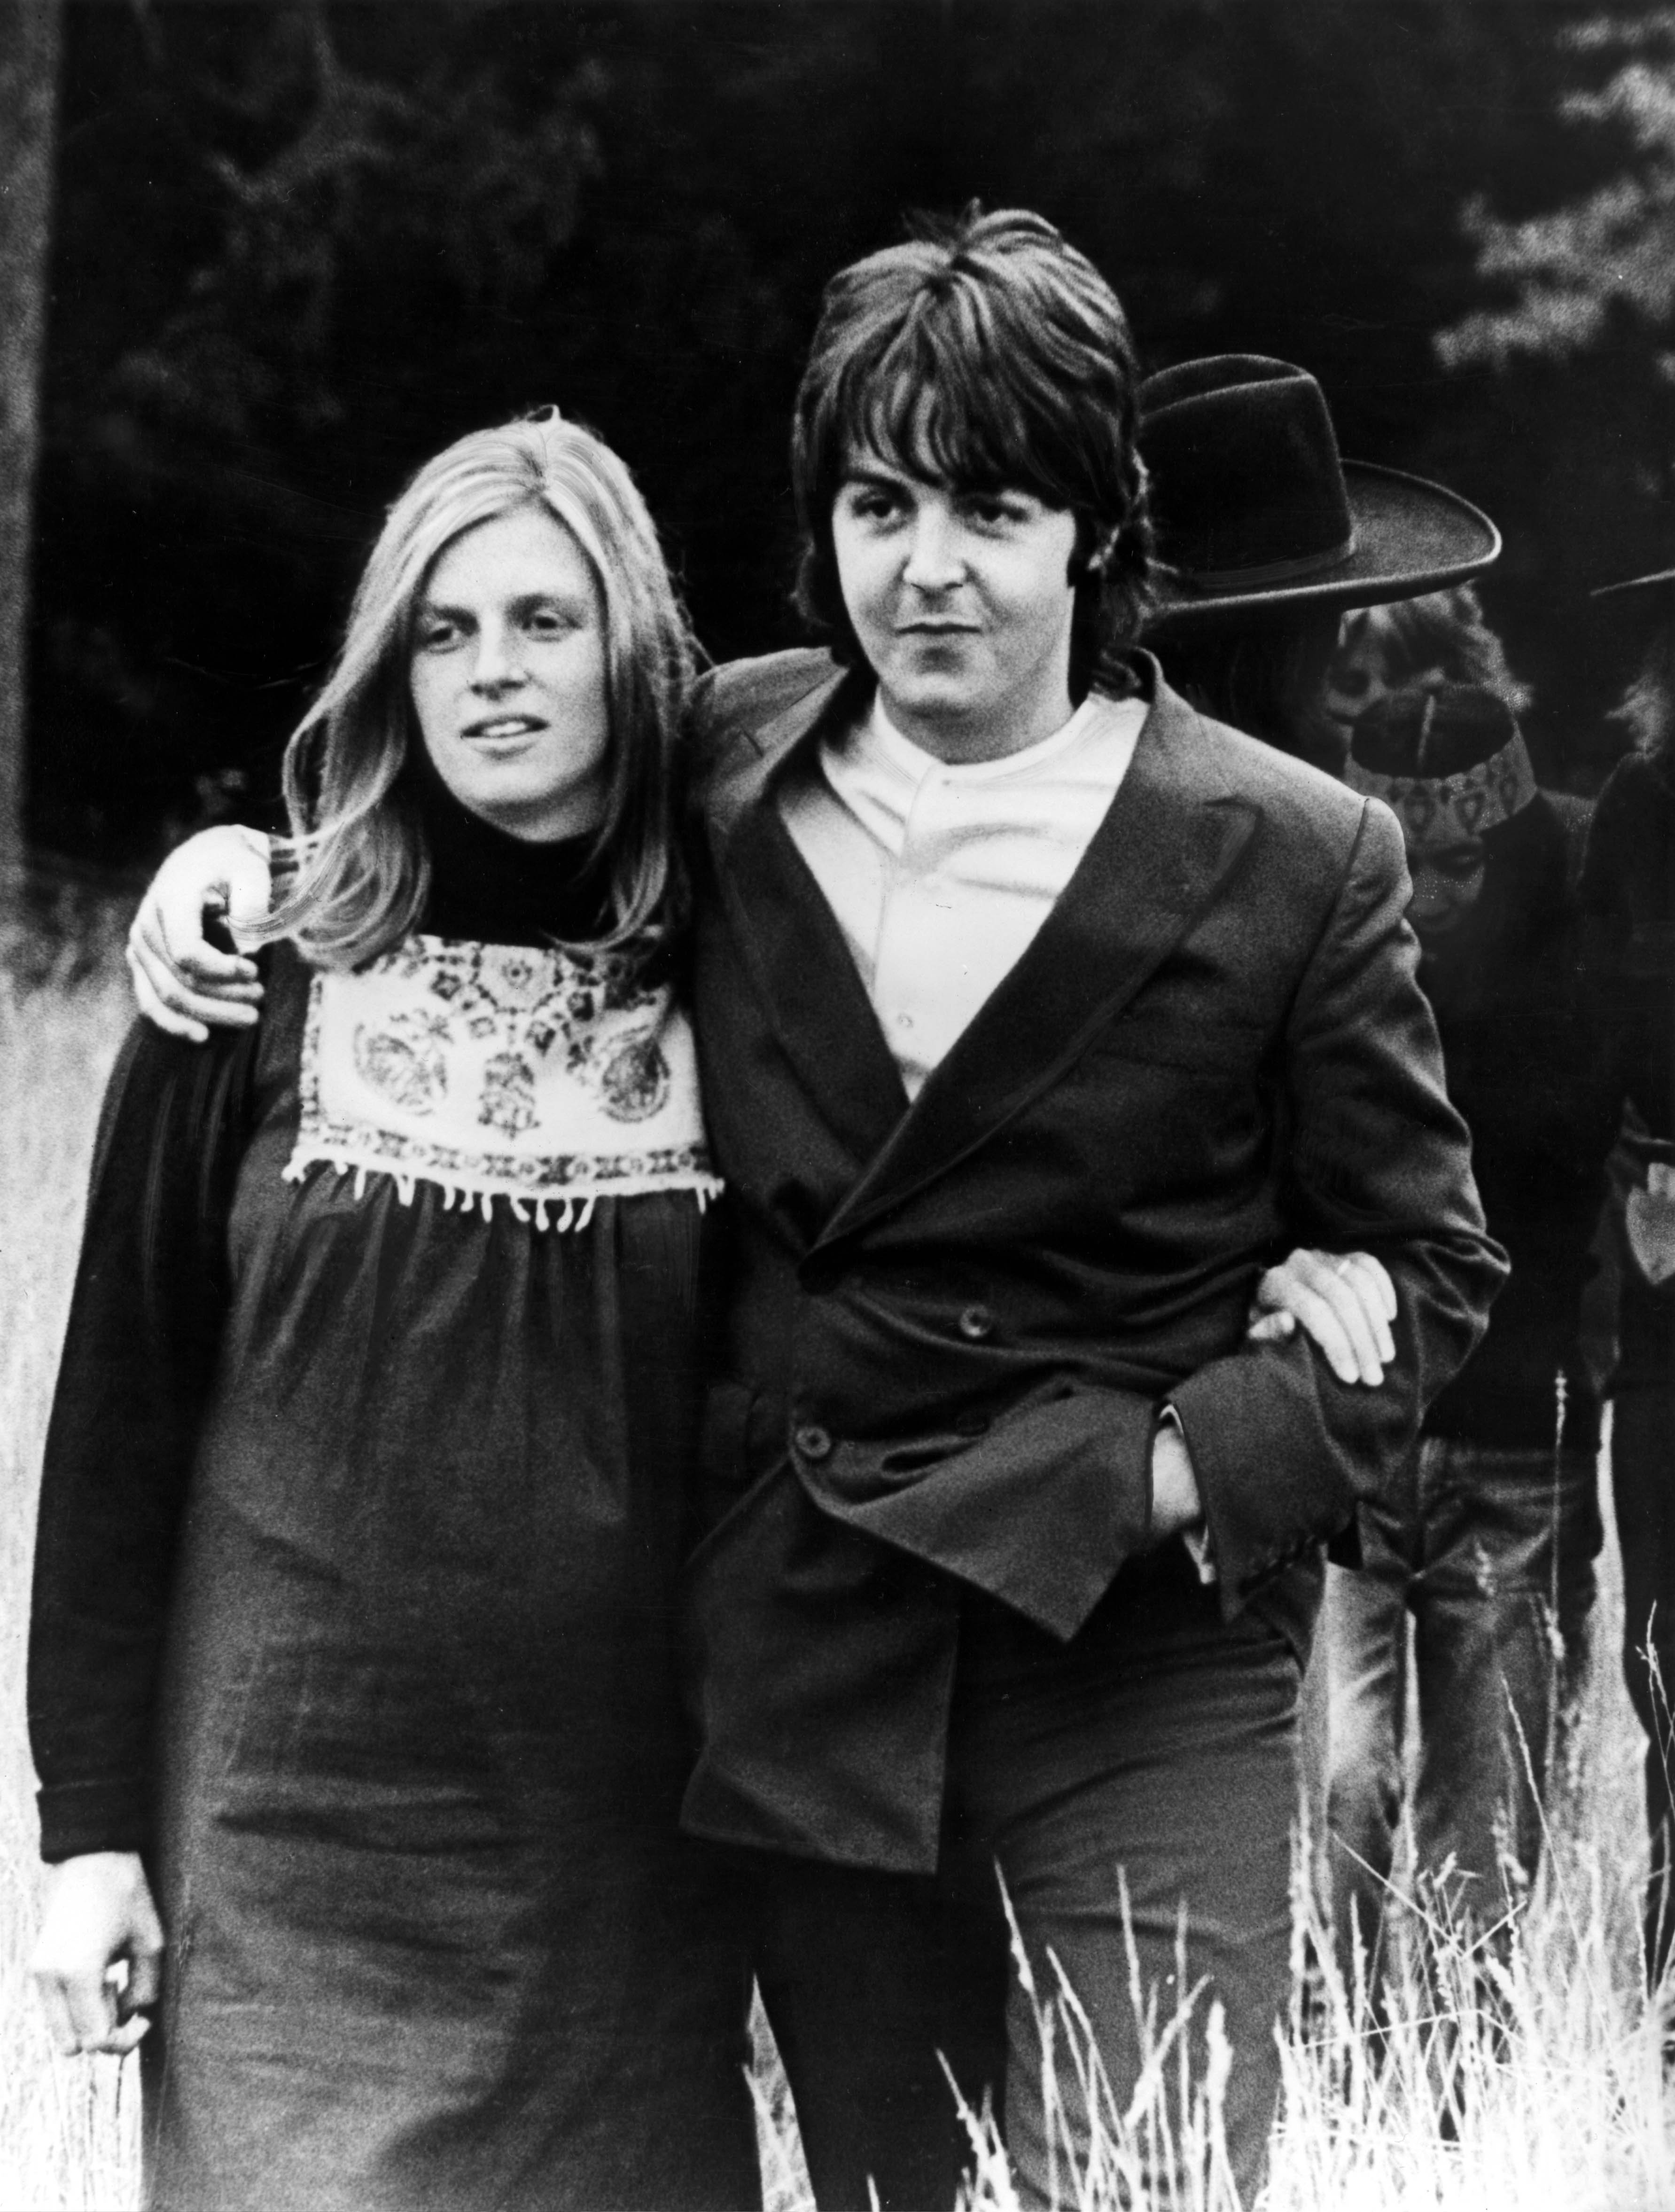 Paul McCartney posing with Linda McCartney a week before the birth of their daughter, Mary | Source: Getty Images